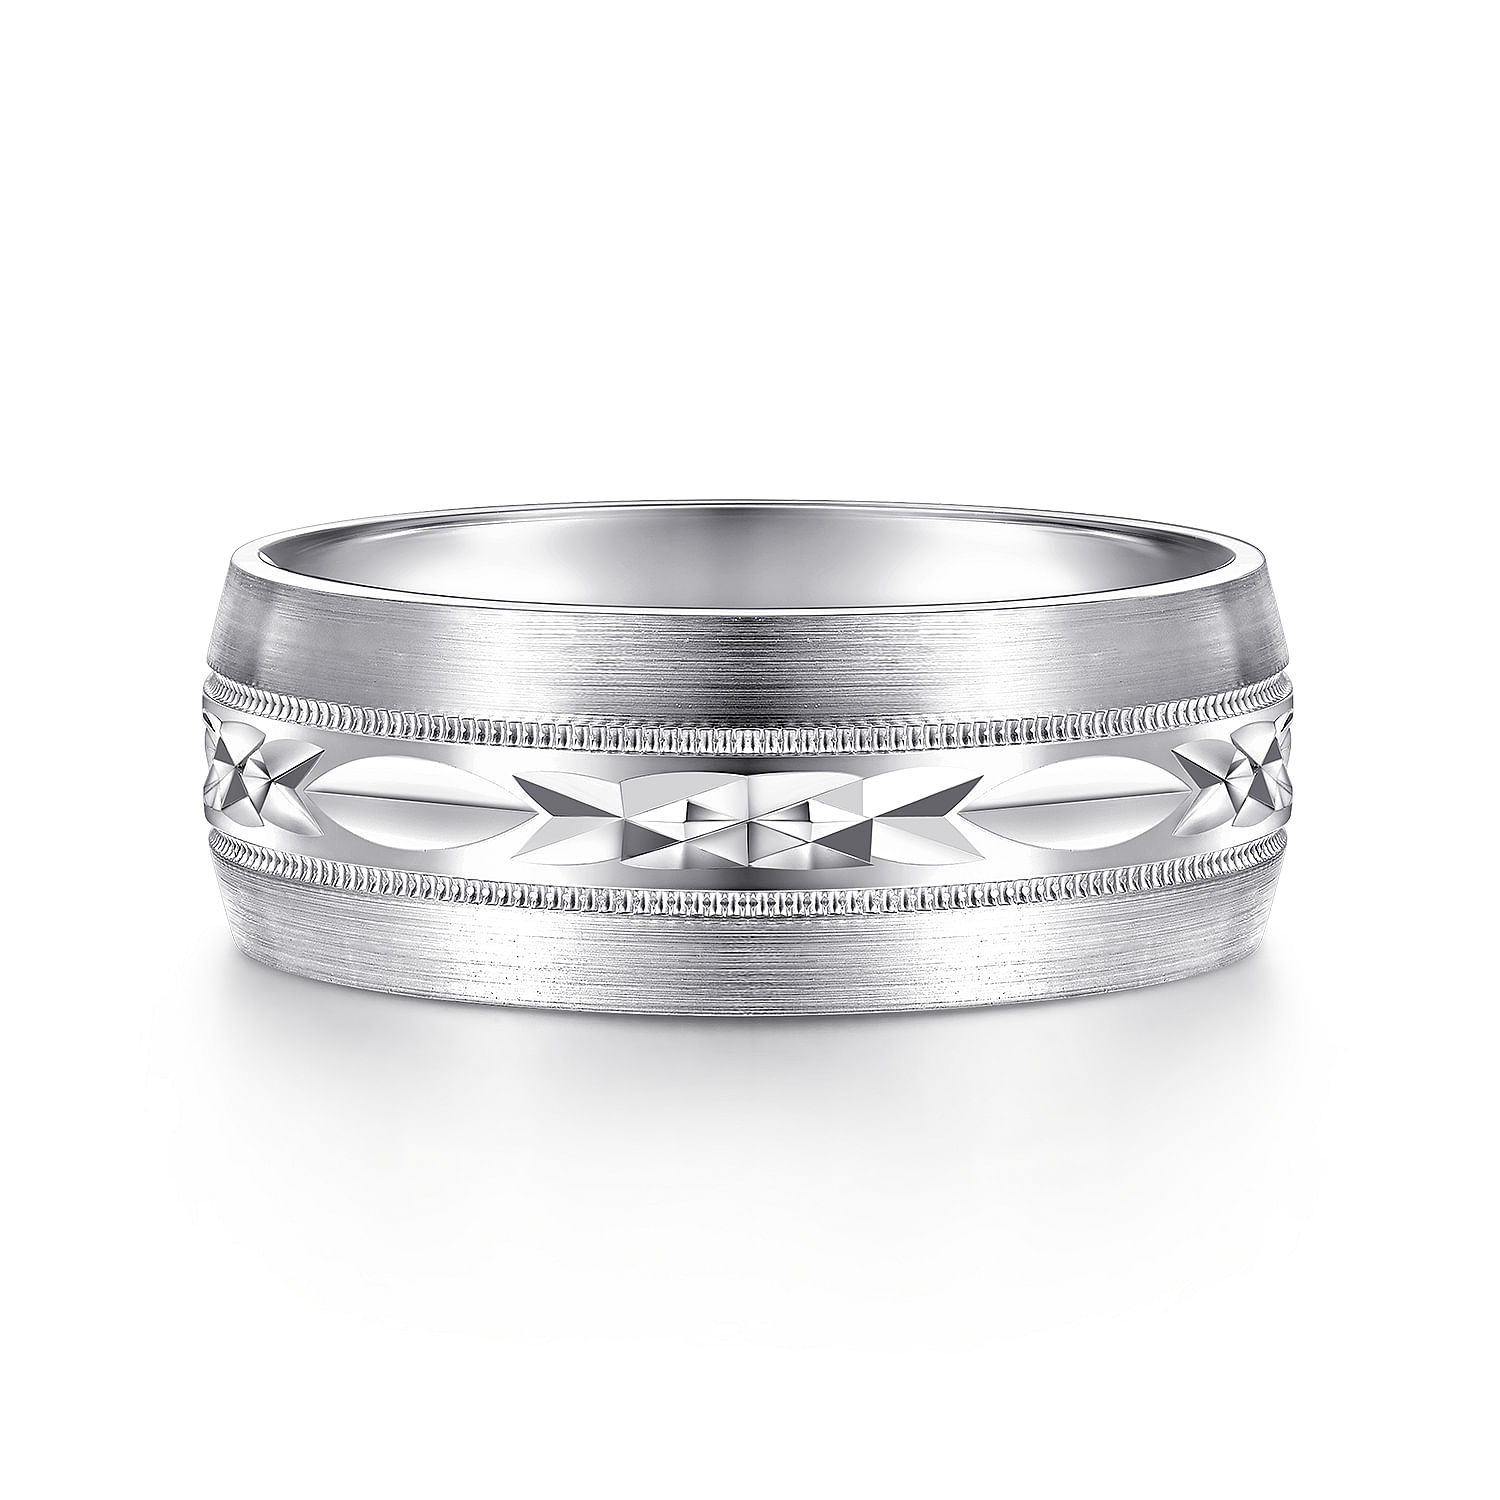 Russell---14K-White-Gold-8mm---Engraved-Men's-Wedding-Band-in-Satin-Finish1